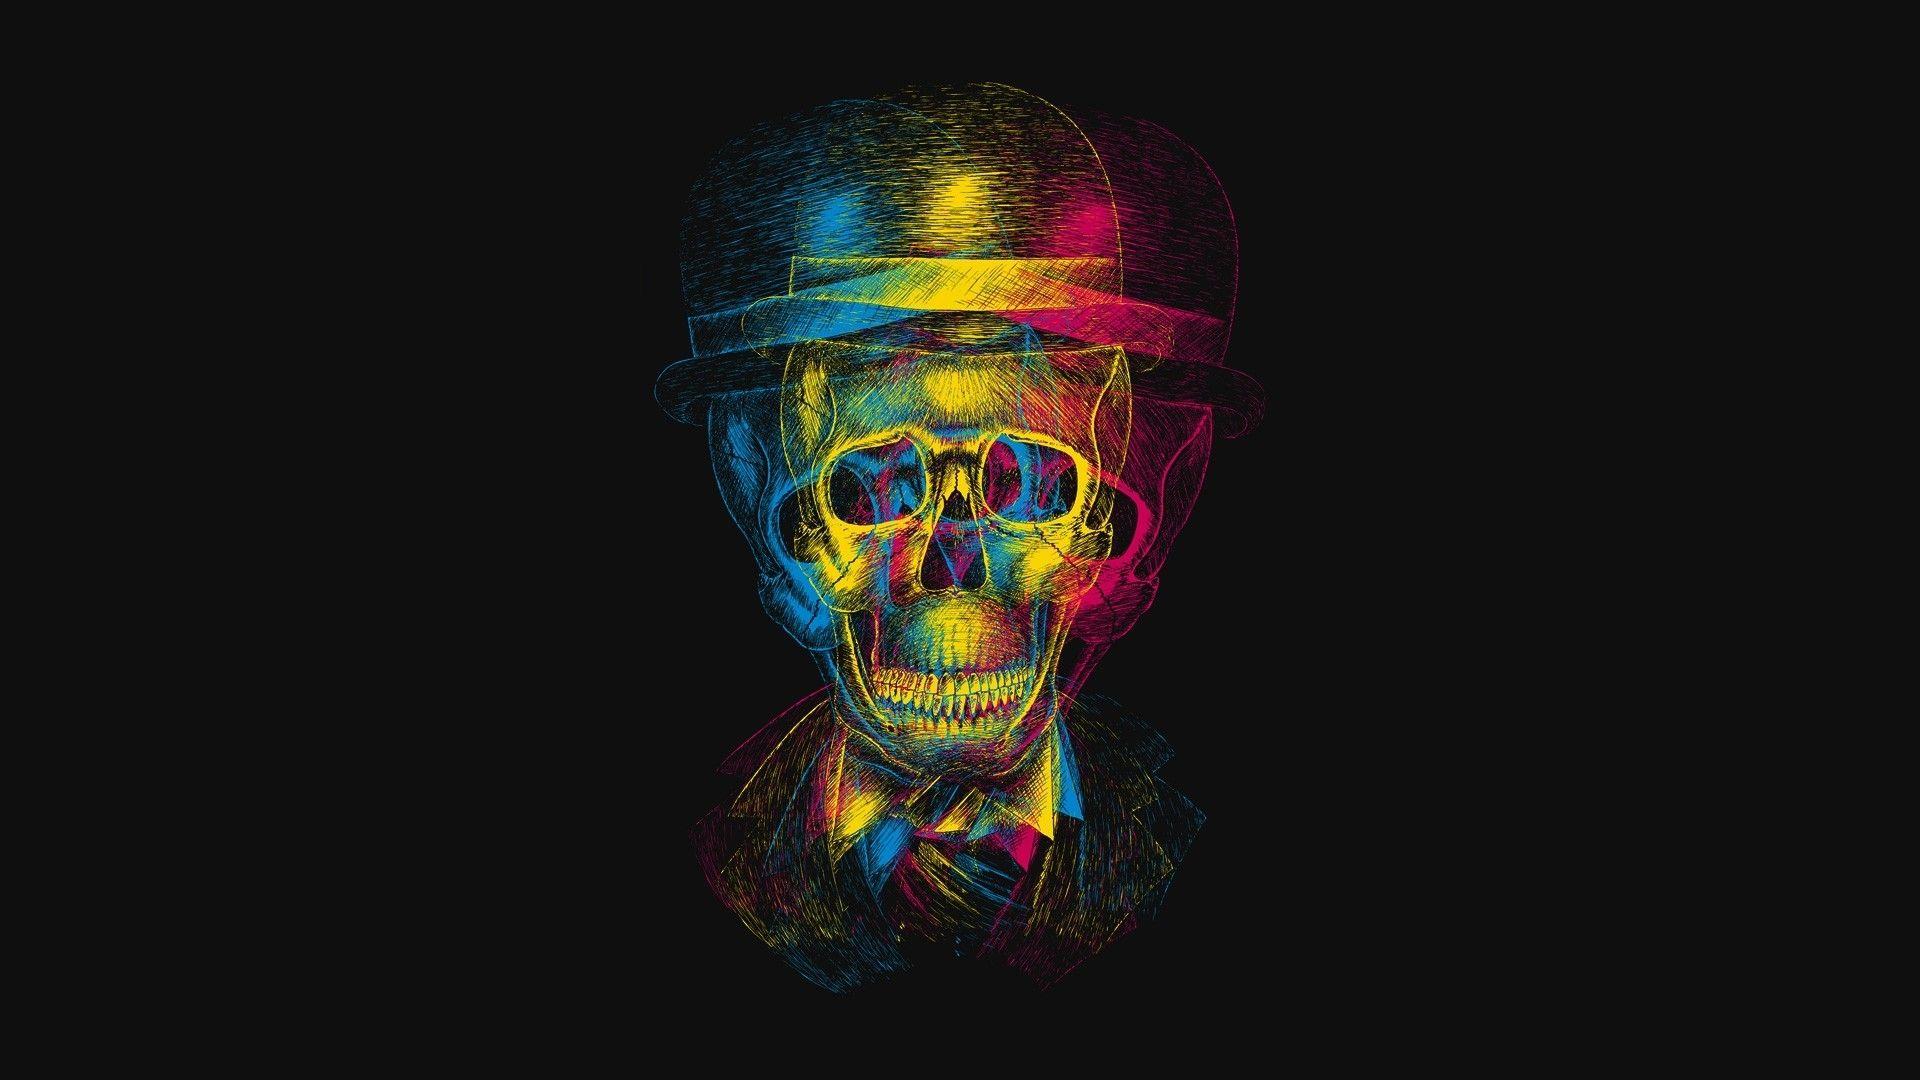 Download Wallpaper 1920x1080 skull, hat, anaglyph, drawing Full HD